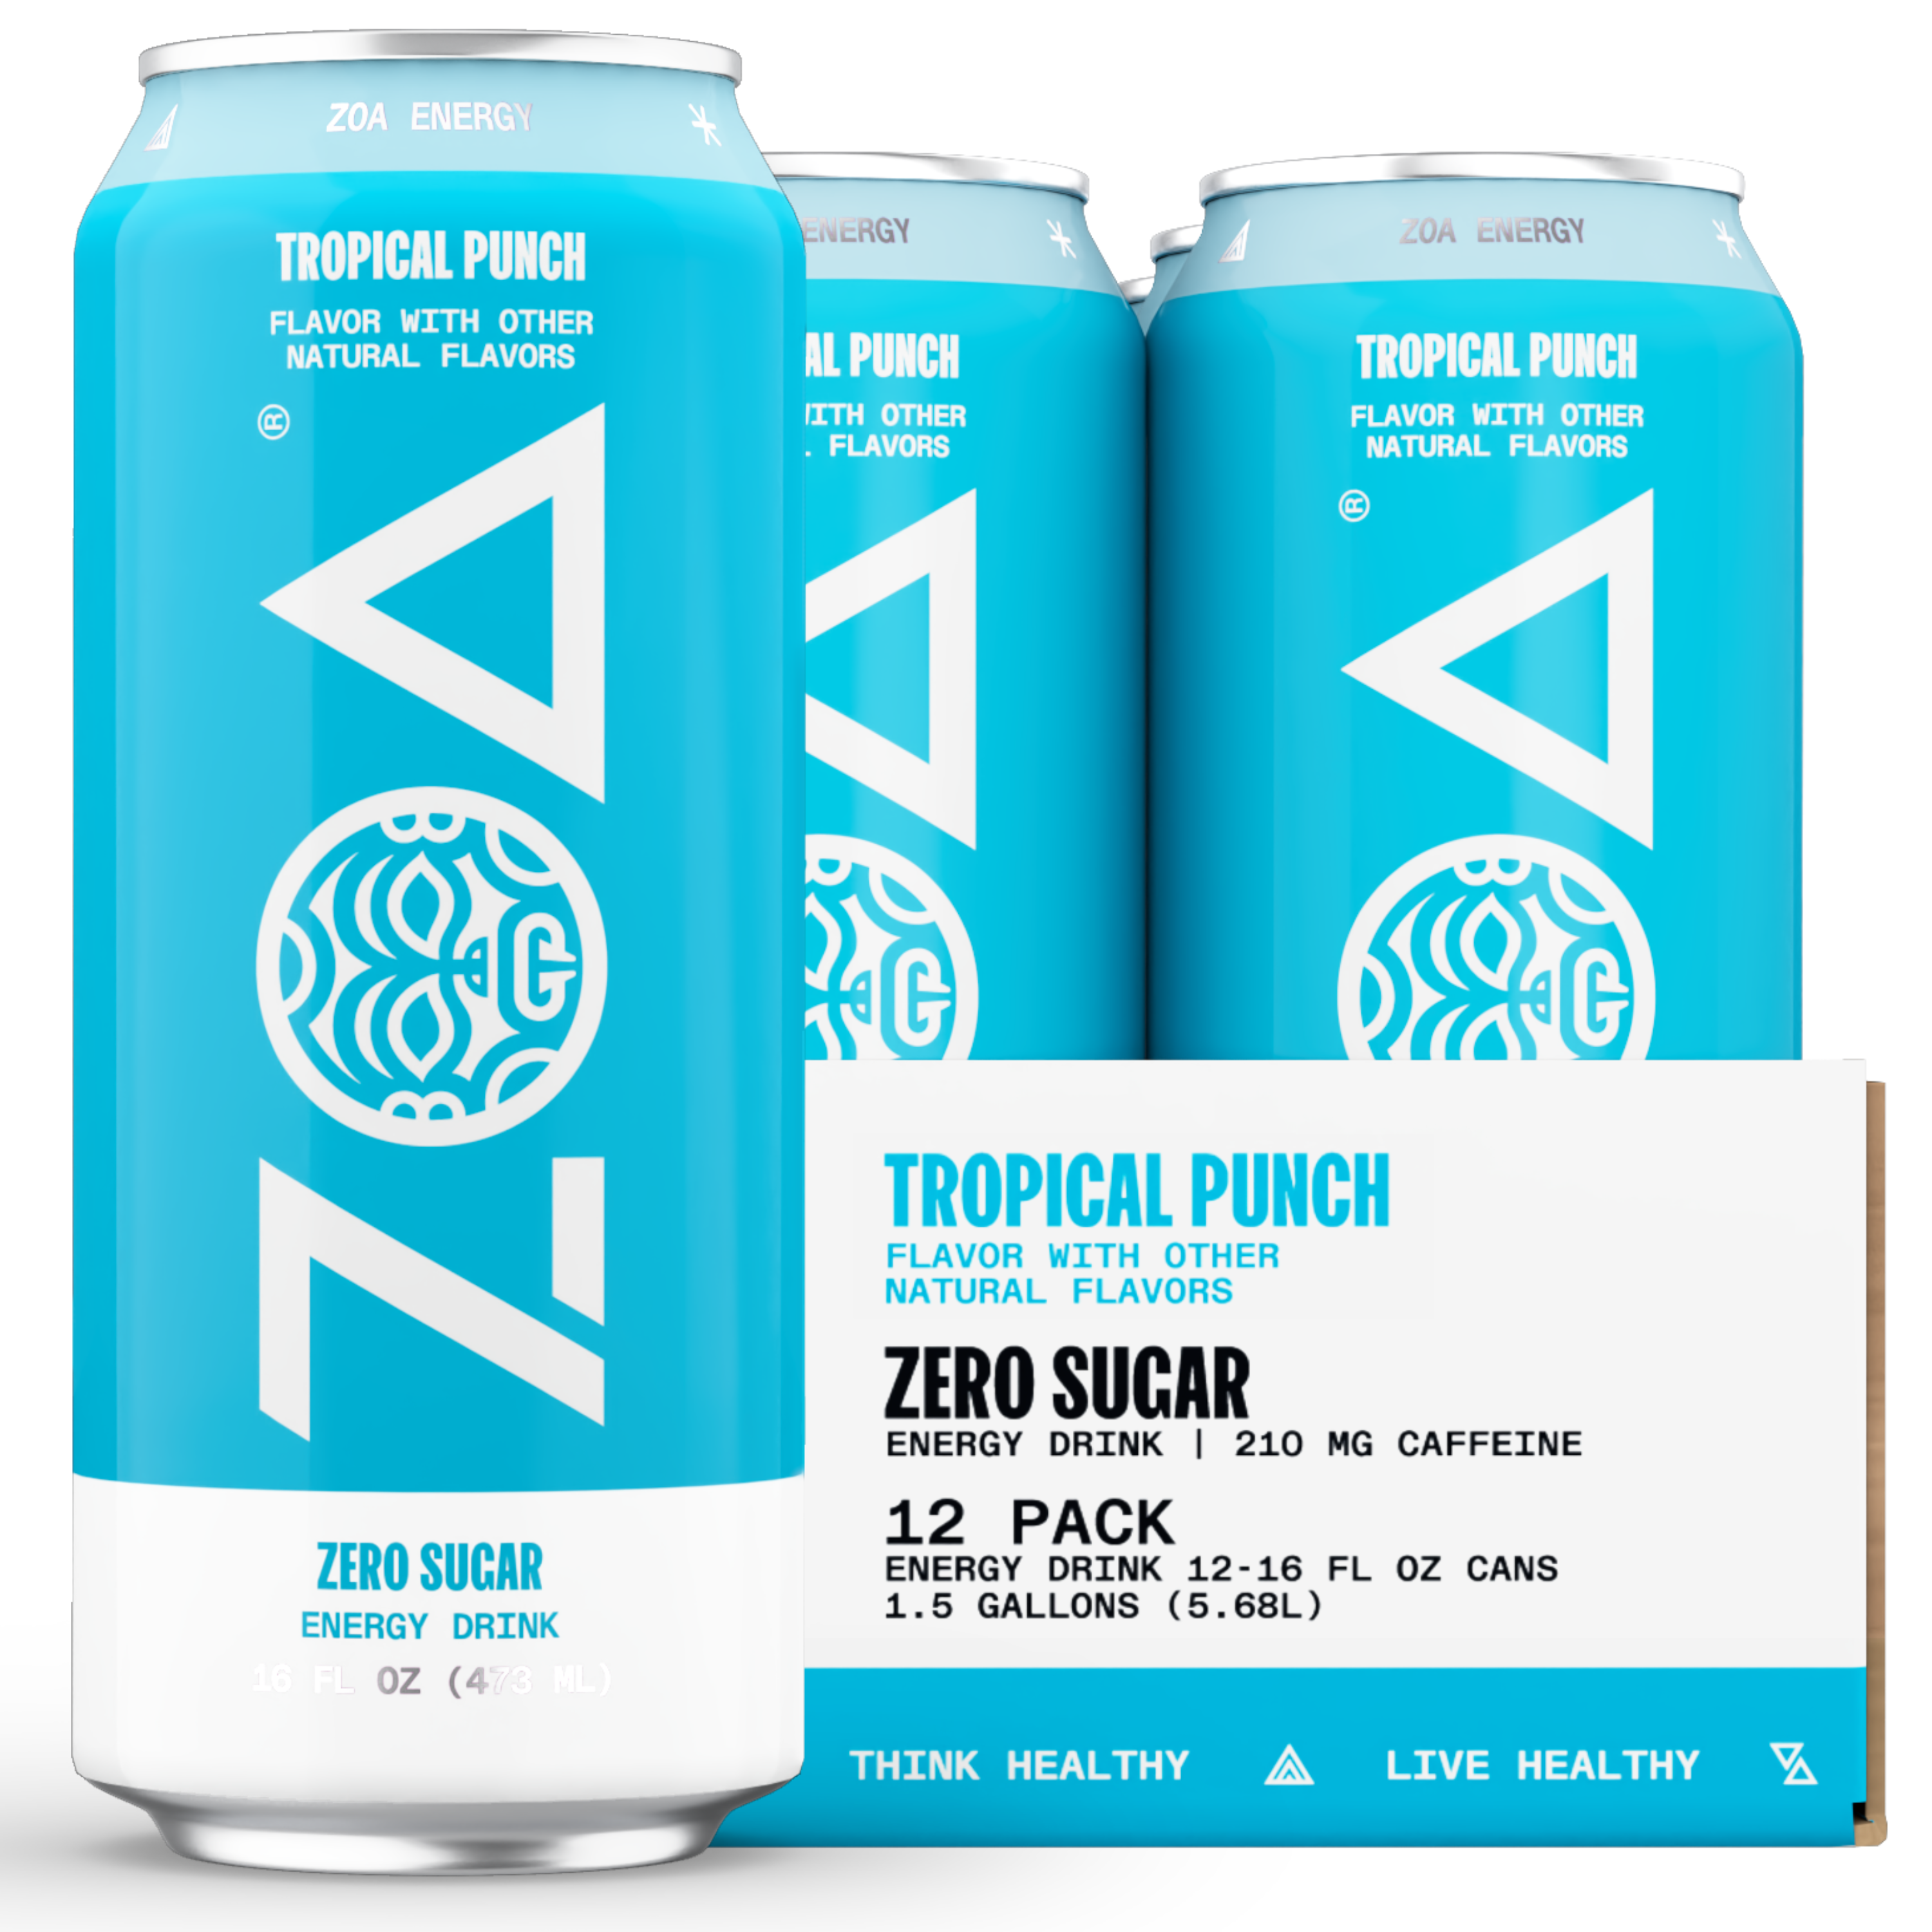 ZOA Tropical Punch Energy Drink